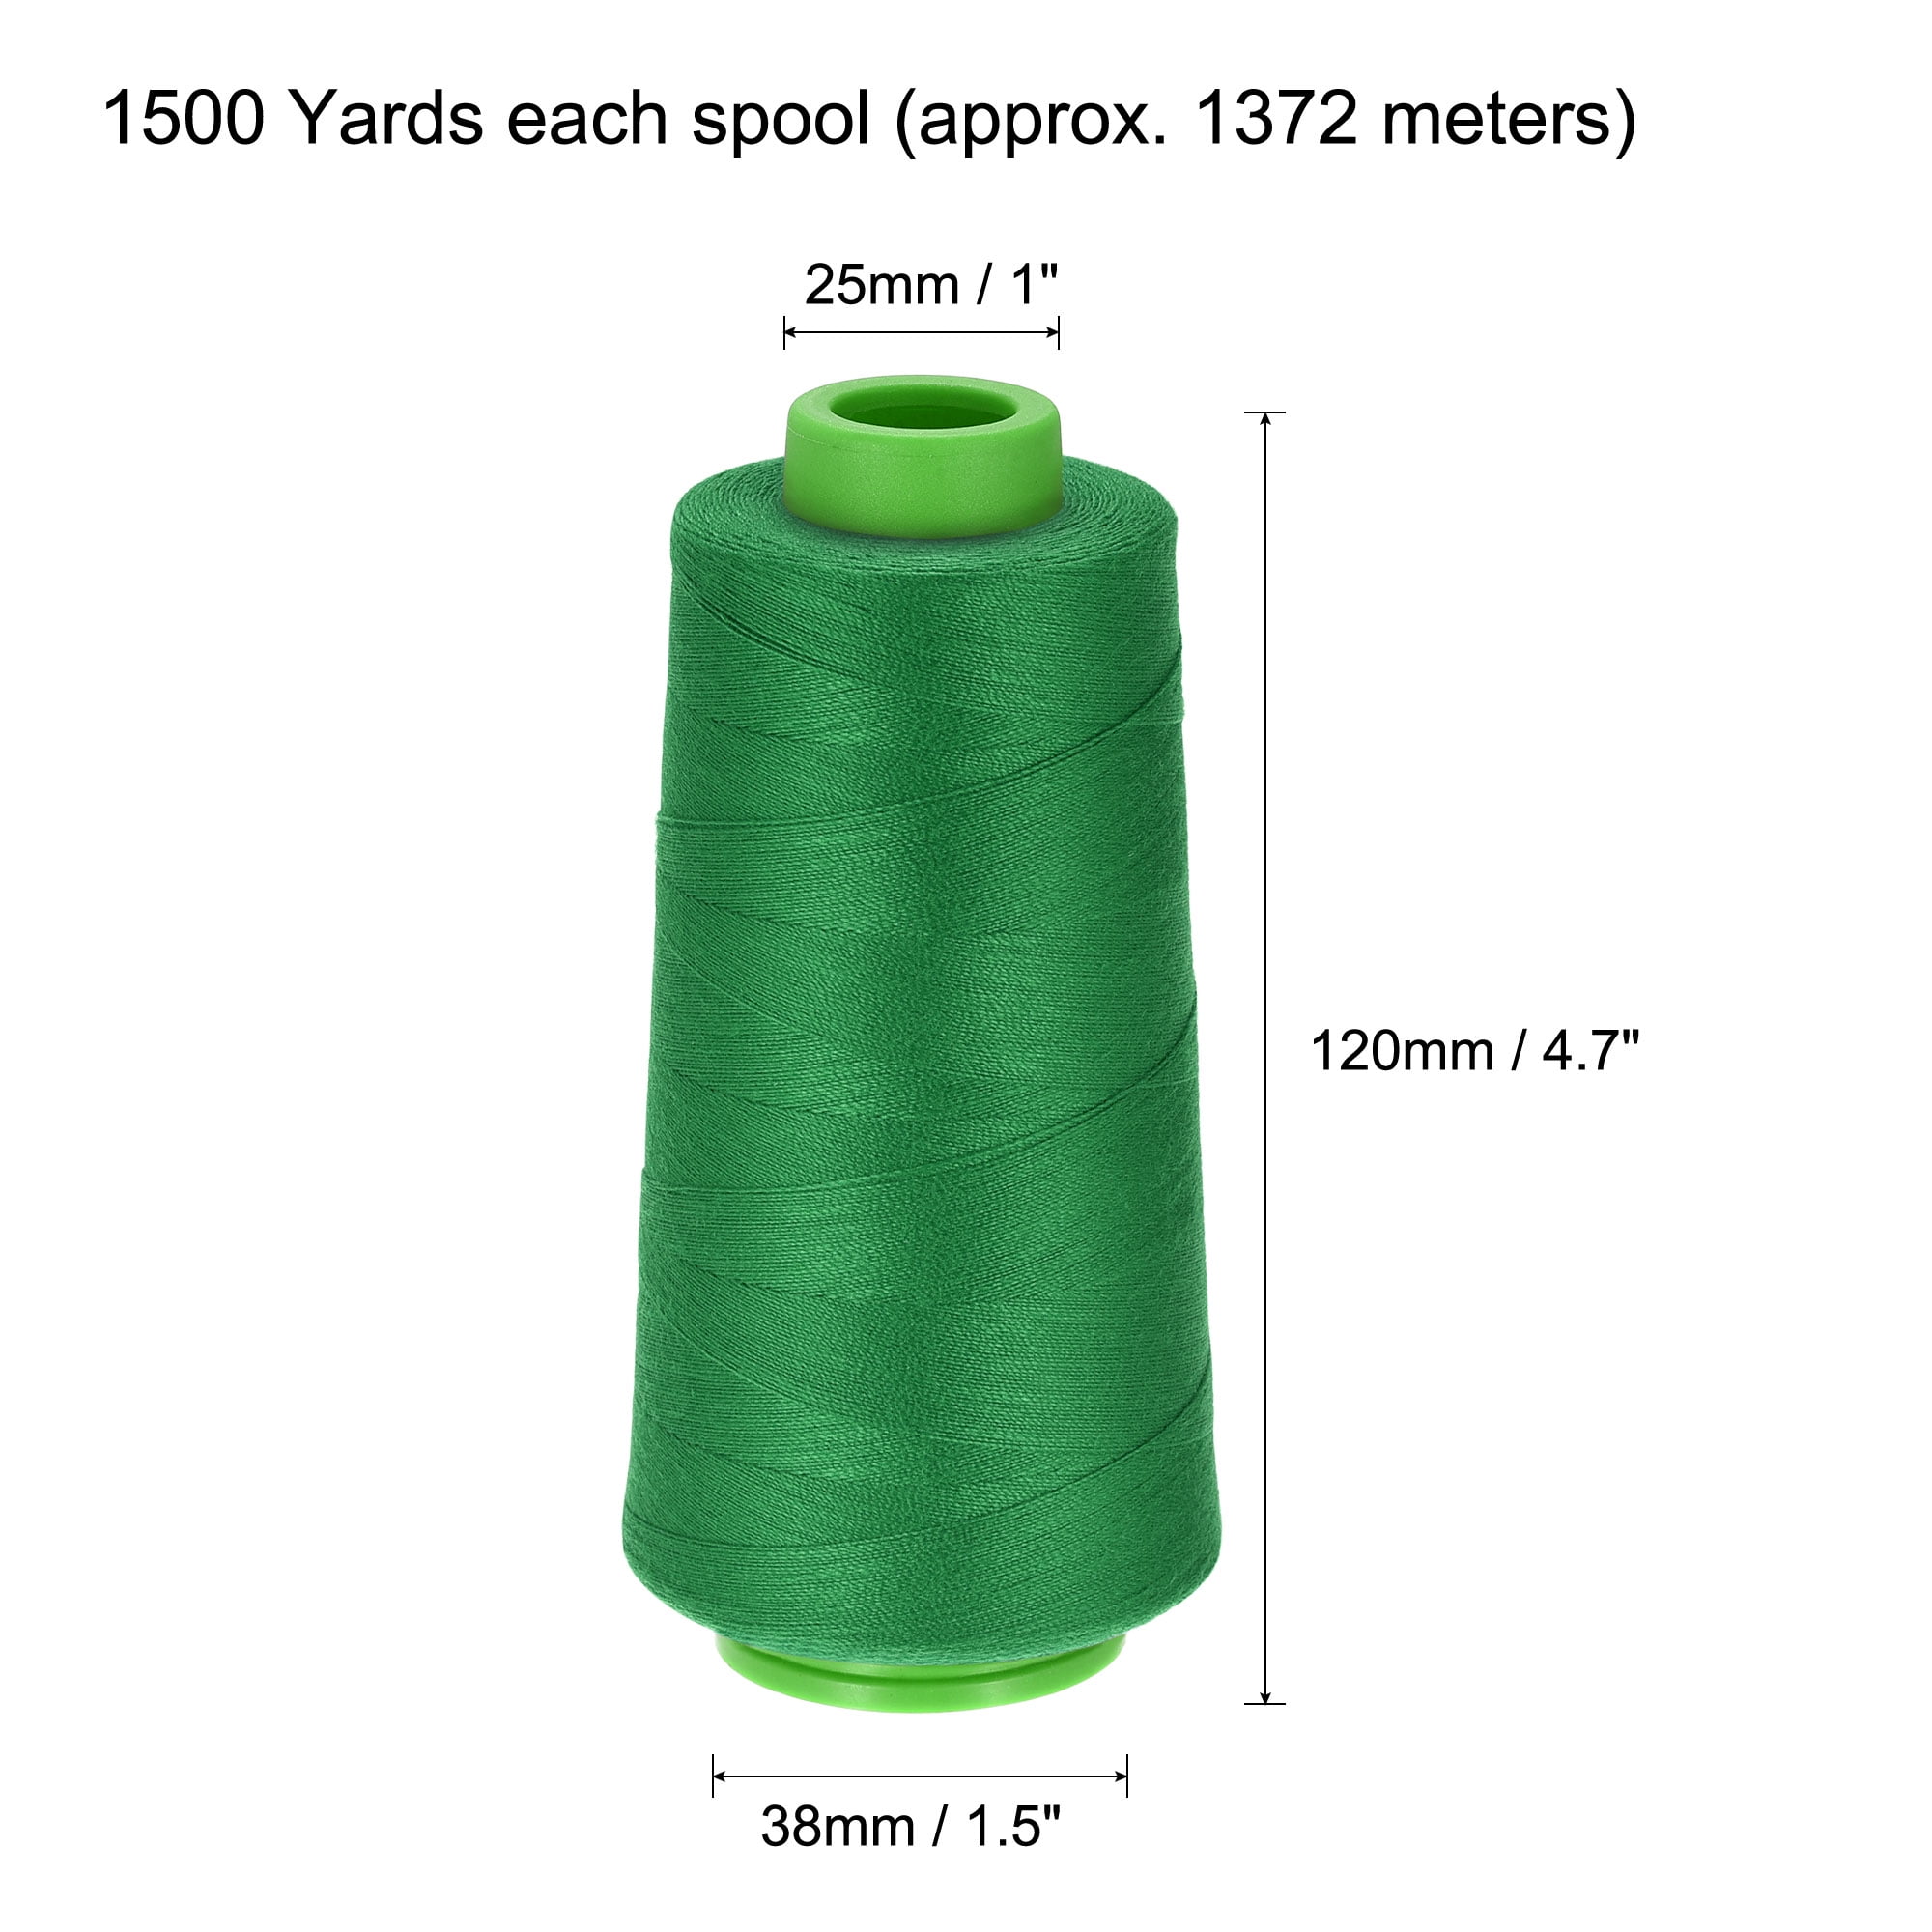 100% Polyester Tex 27 Sewing Thread 10,000 Yards - Green #6432